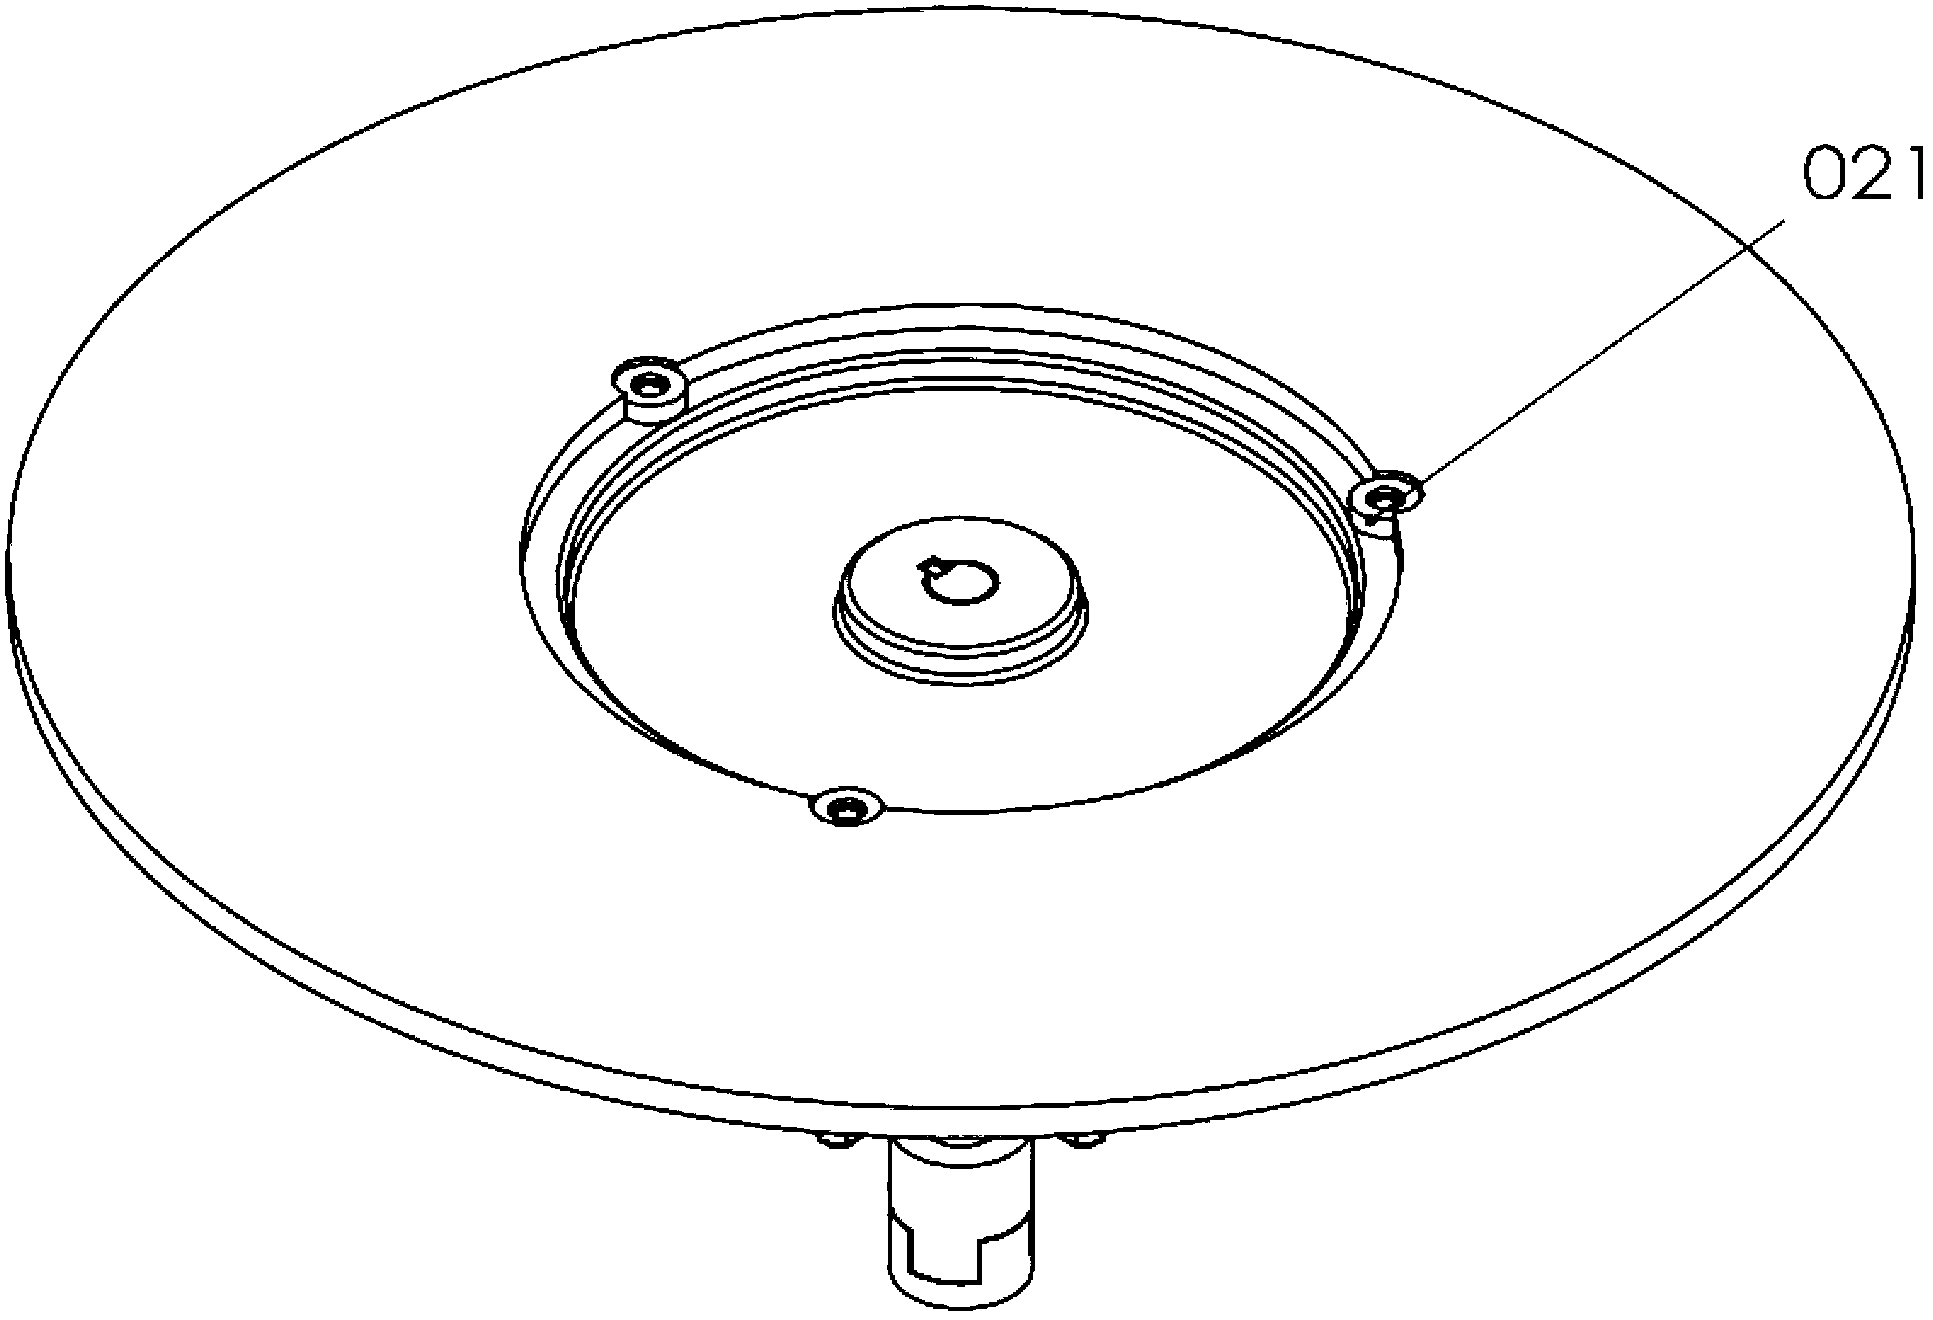 Accurate screw high-speed detection device capable of feeding materials through glass rotary plate